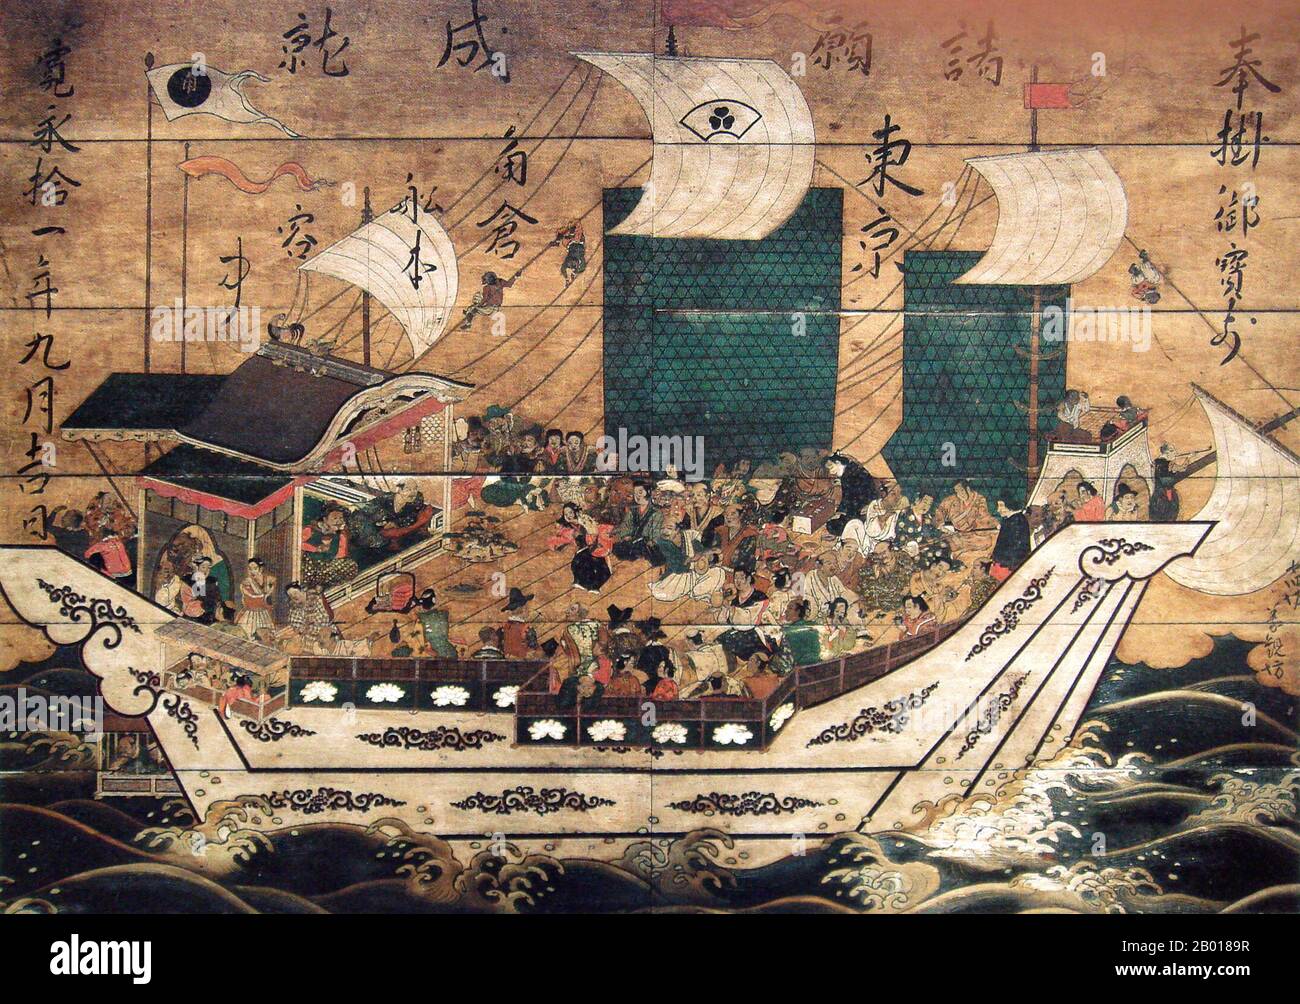 Japan: Suminokura red seal ship with foreigners. Wood plaque painting from Kiyomizu-dera Temple, Kyoto, c. 1633.  Shuinsen, or 'Red Seal ships', were Japanese armed merchant sailing ships bound for Southeast Asian ports with a red-sealed patent issued by the early Tokugawa shogunate in the first half of the 17th century. Between 1600 and 1635, more than 350 Japanese ships went overseas under this permit system.  Japanese merchants mainly exported silver, diamonds, copper, swords and other artifacts, and imported Chinese silk as well as some Southeast Asian products (like sugar and deer skins). Stock Photo